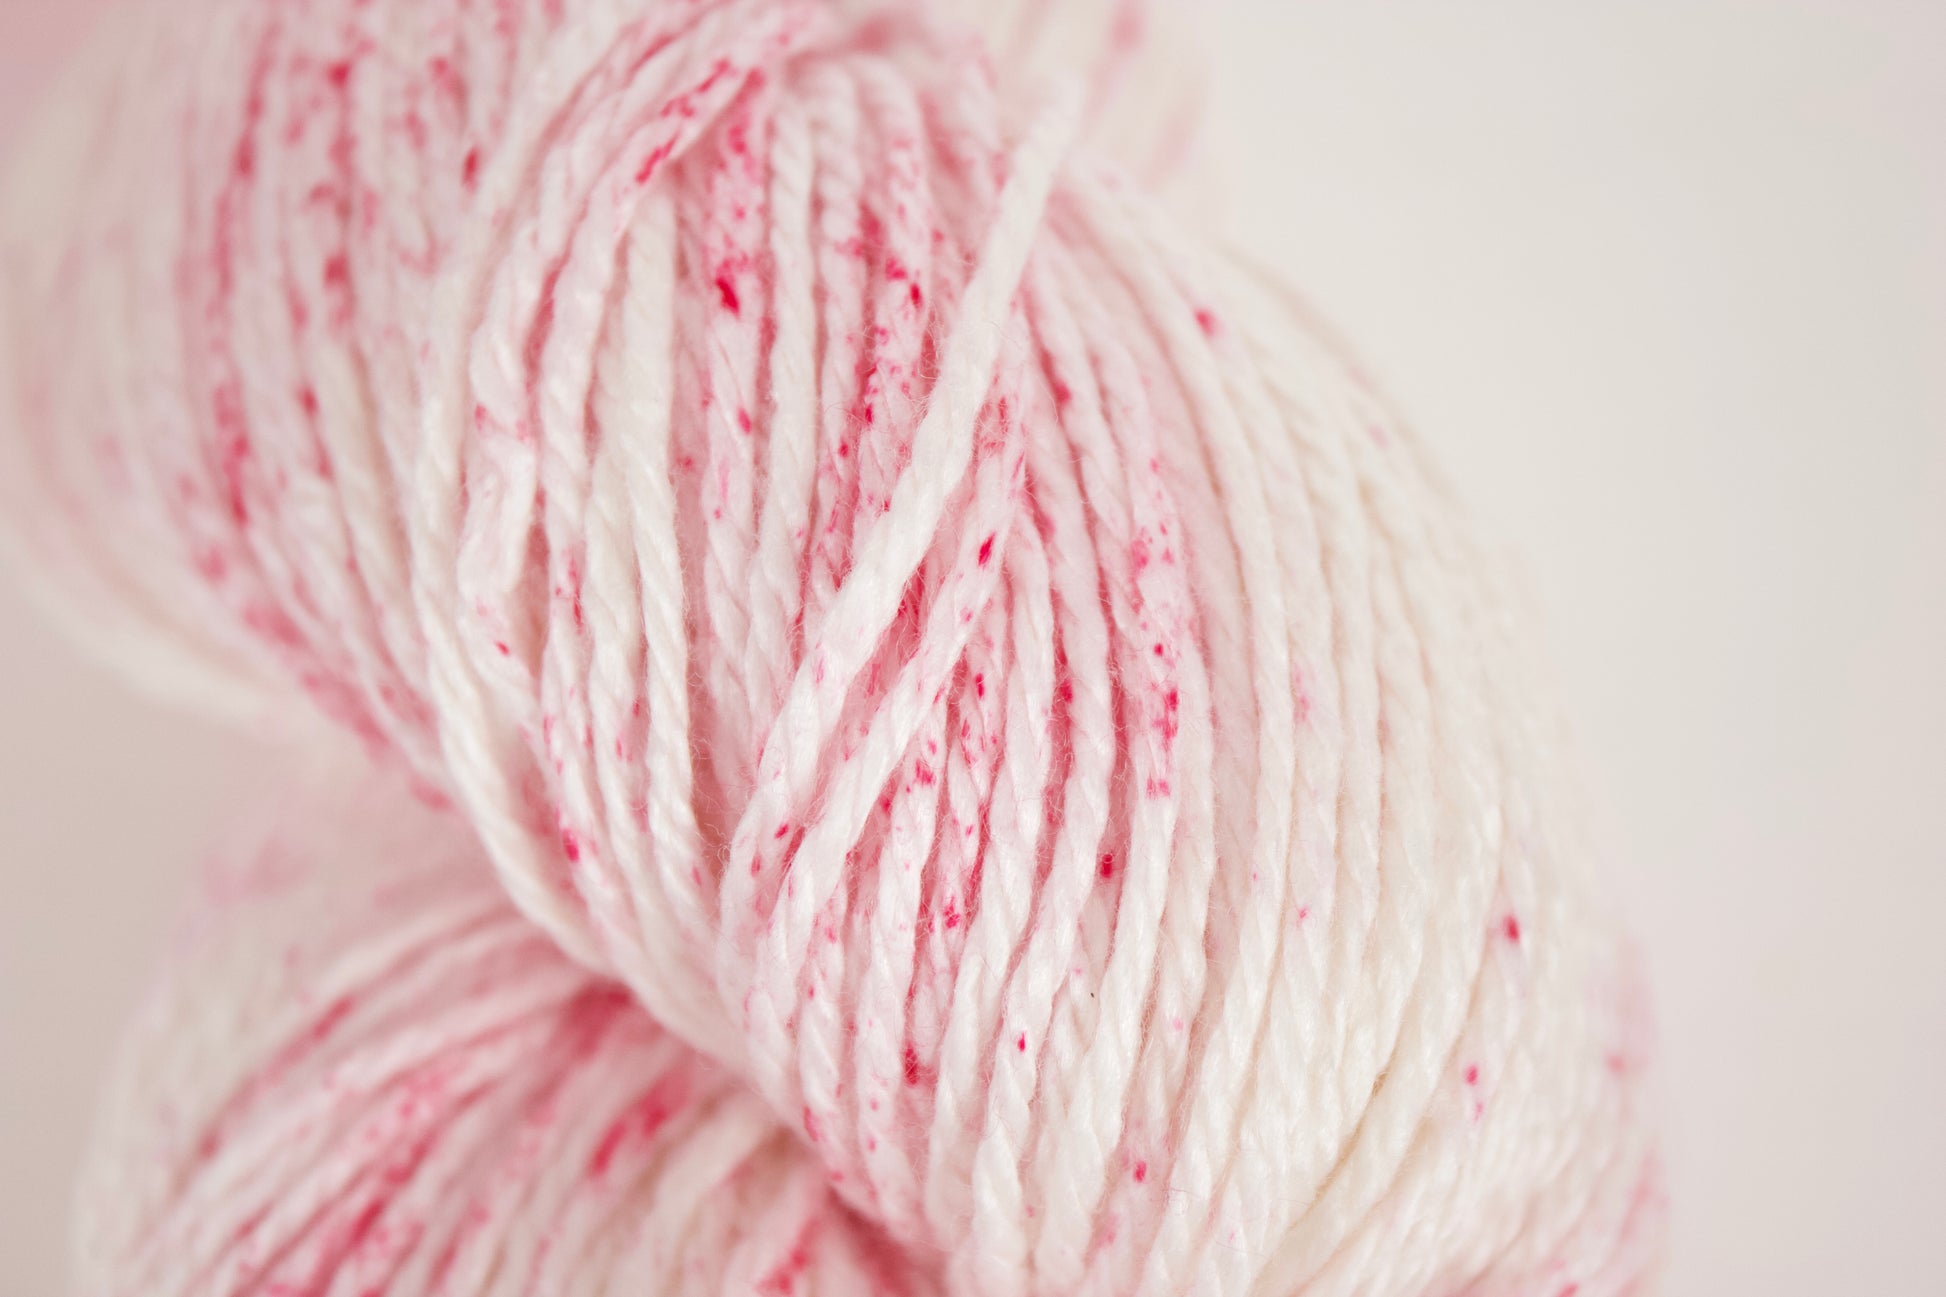 Raspberry Oat Mylk: Creamy white base with hot pink speckles in splotchy sections on Alnilam Worsted vegan yarn base.